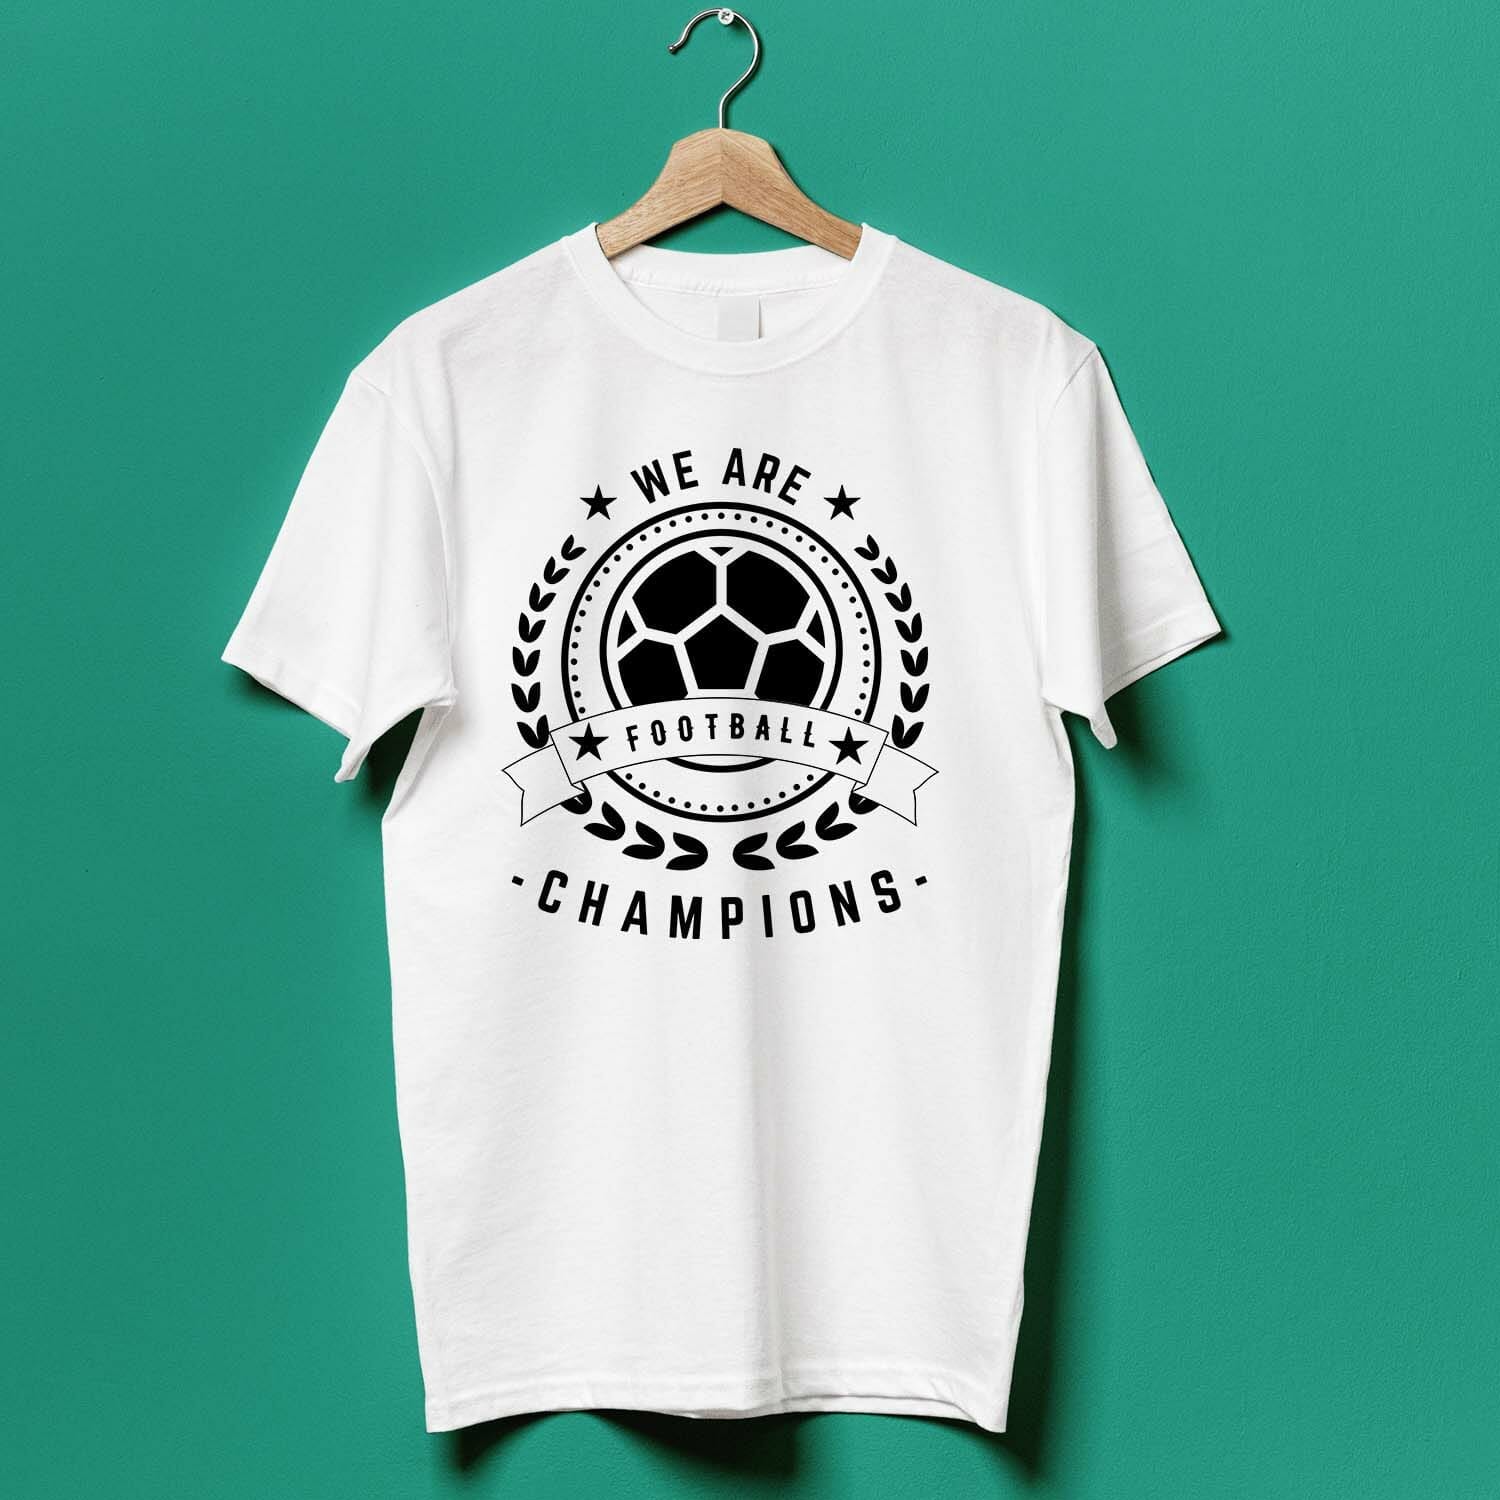 We are Football Champions T-shirt Design